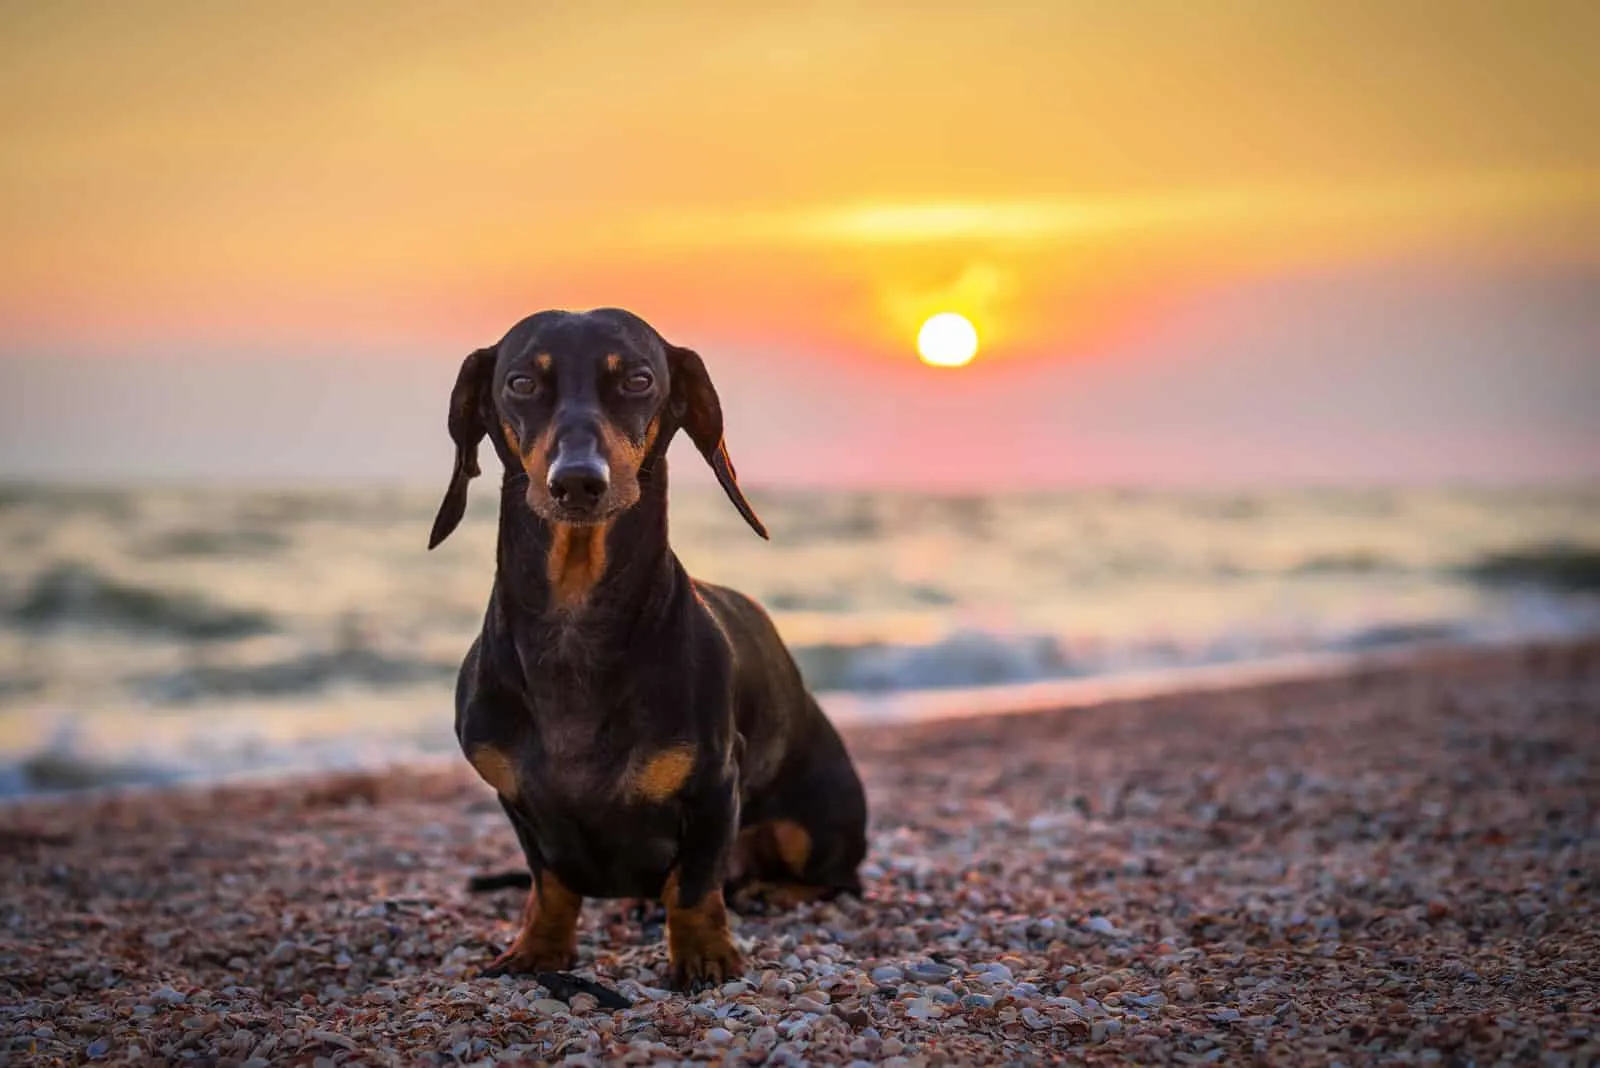 dachshund dog standing on the beach at sunset